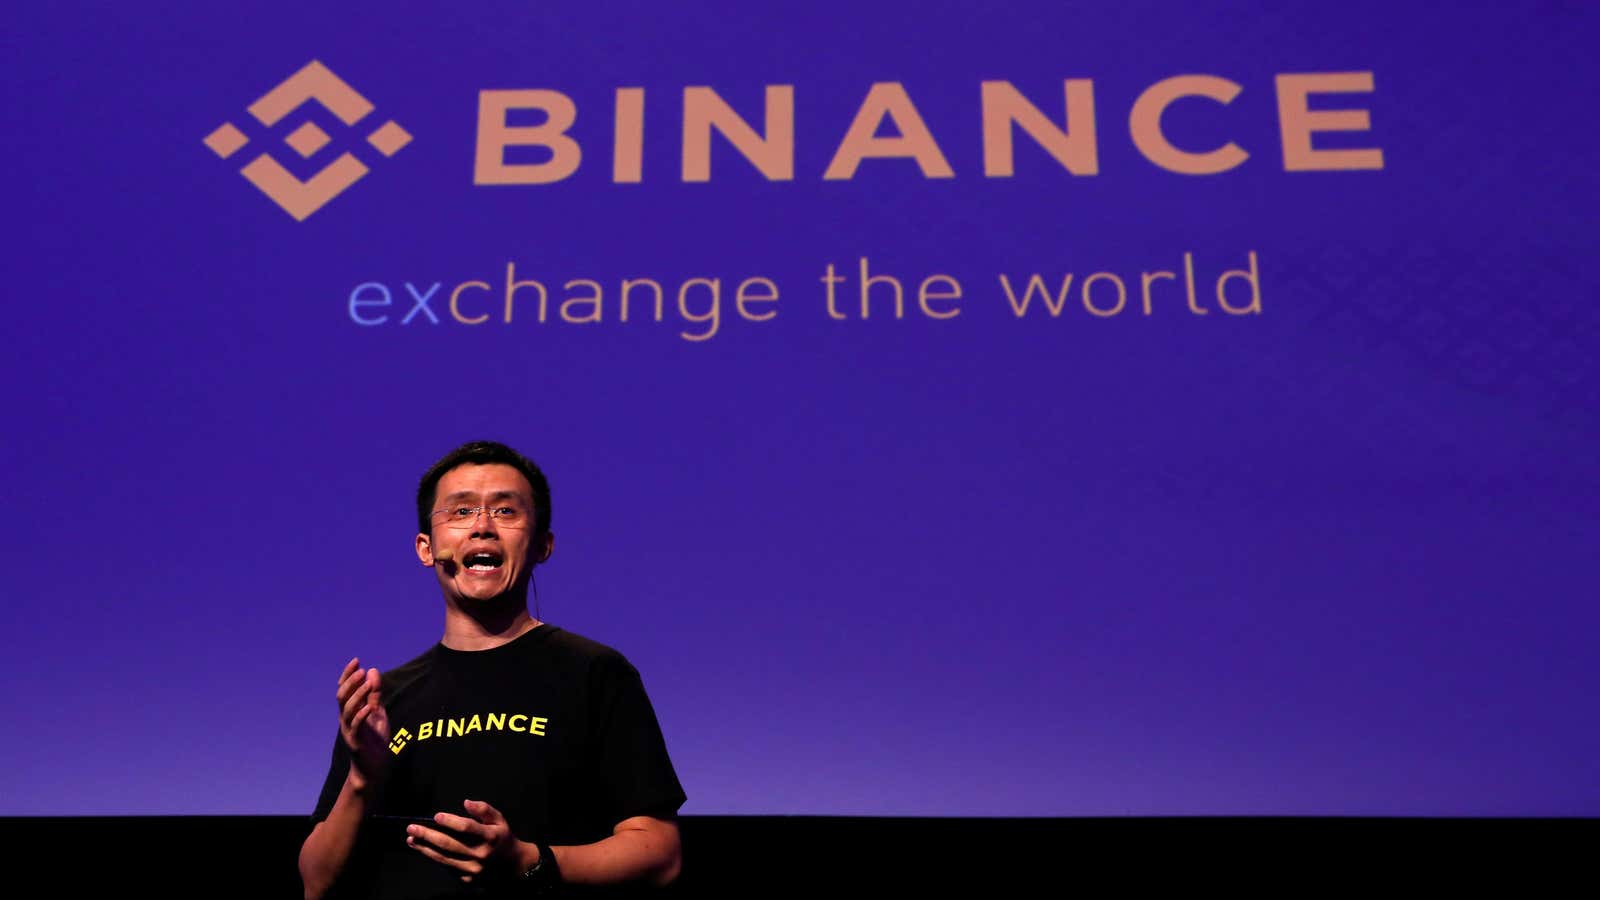 An ownership clash with US-based Binance has halved crypto trade on India's WazirX